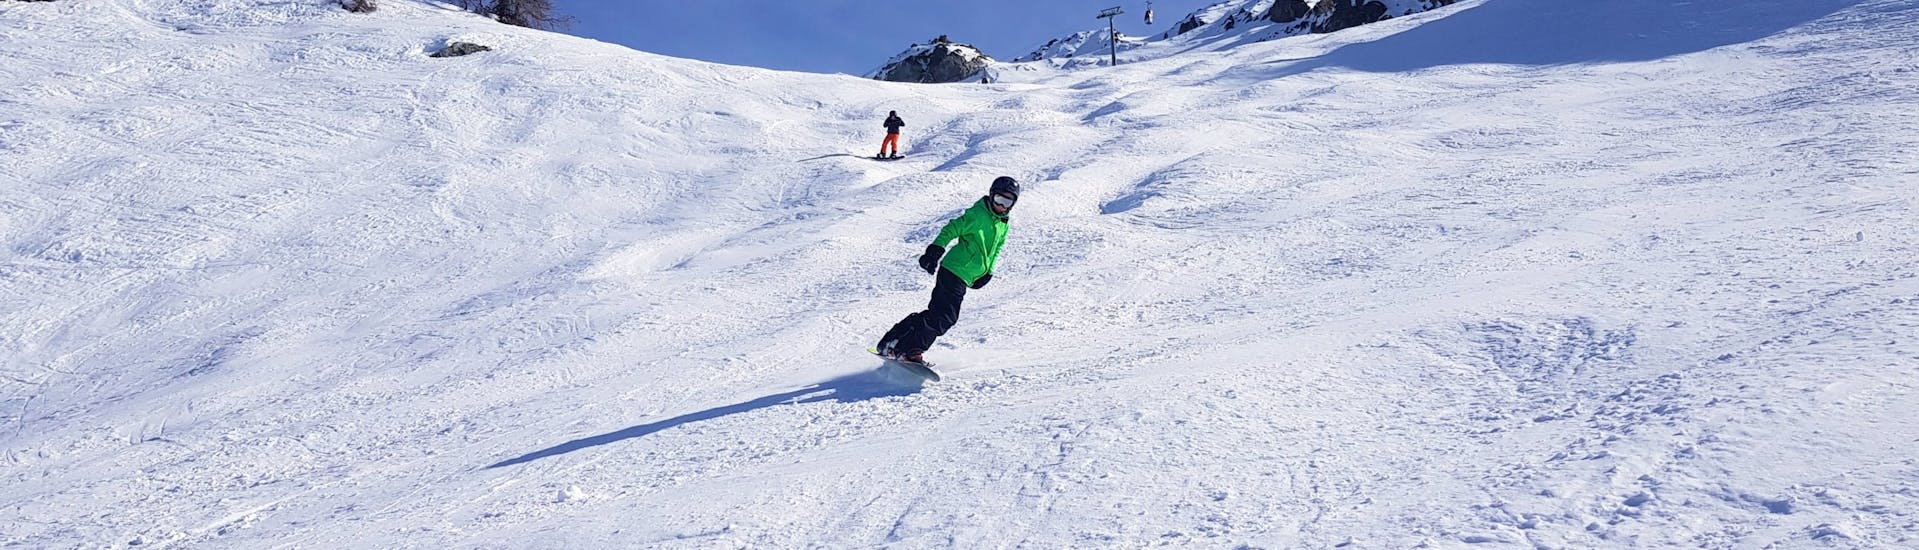 A snowboarder is riding down a slope during their Private Snowboarding Lessons with Evolution 2 Peisy Vallandry.